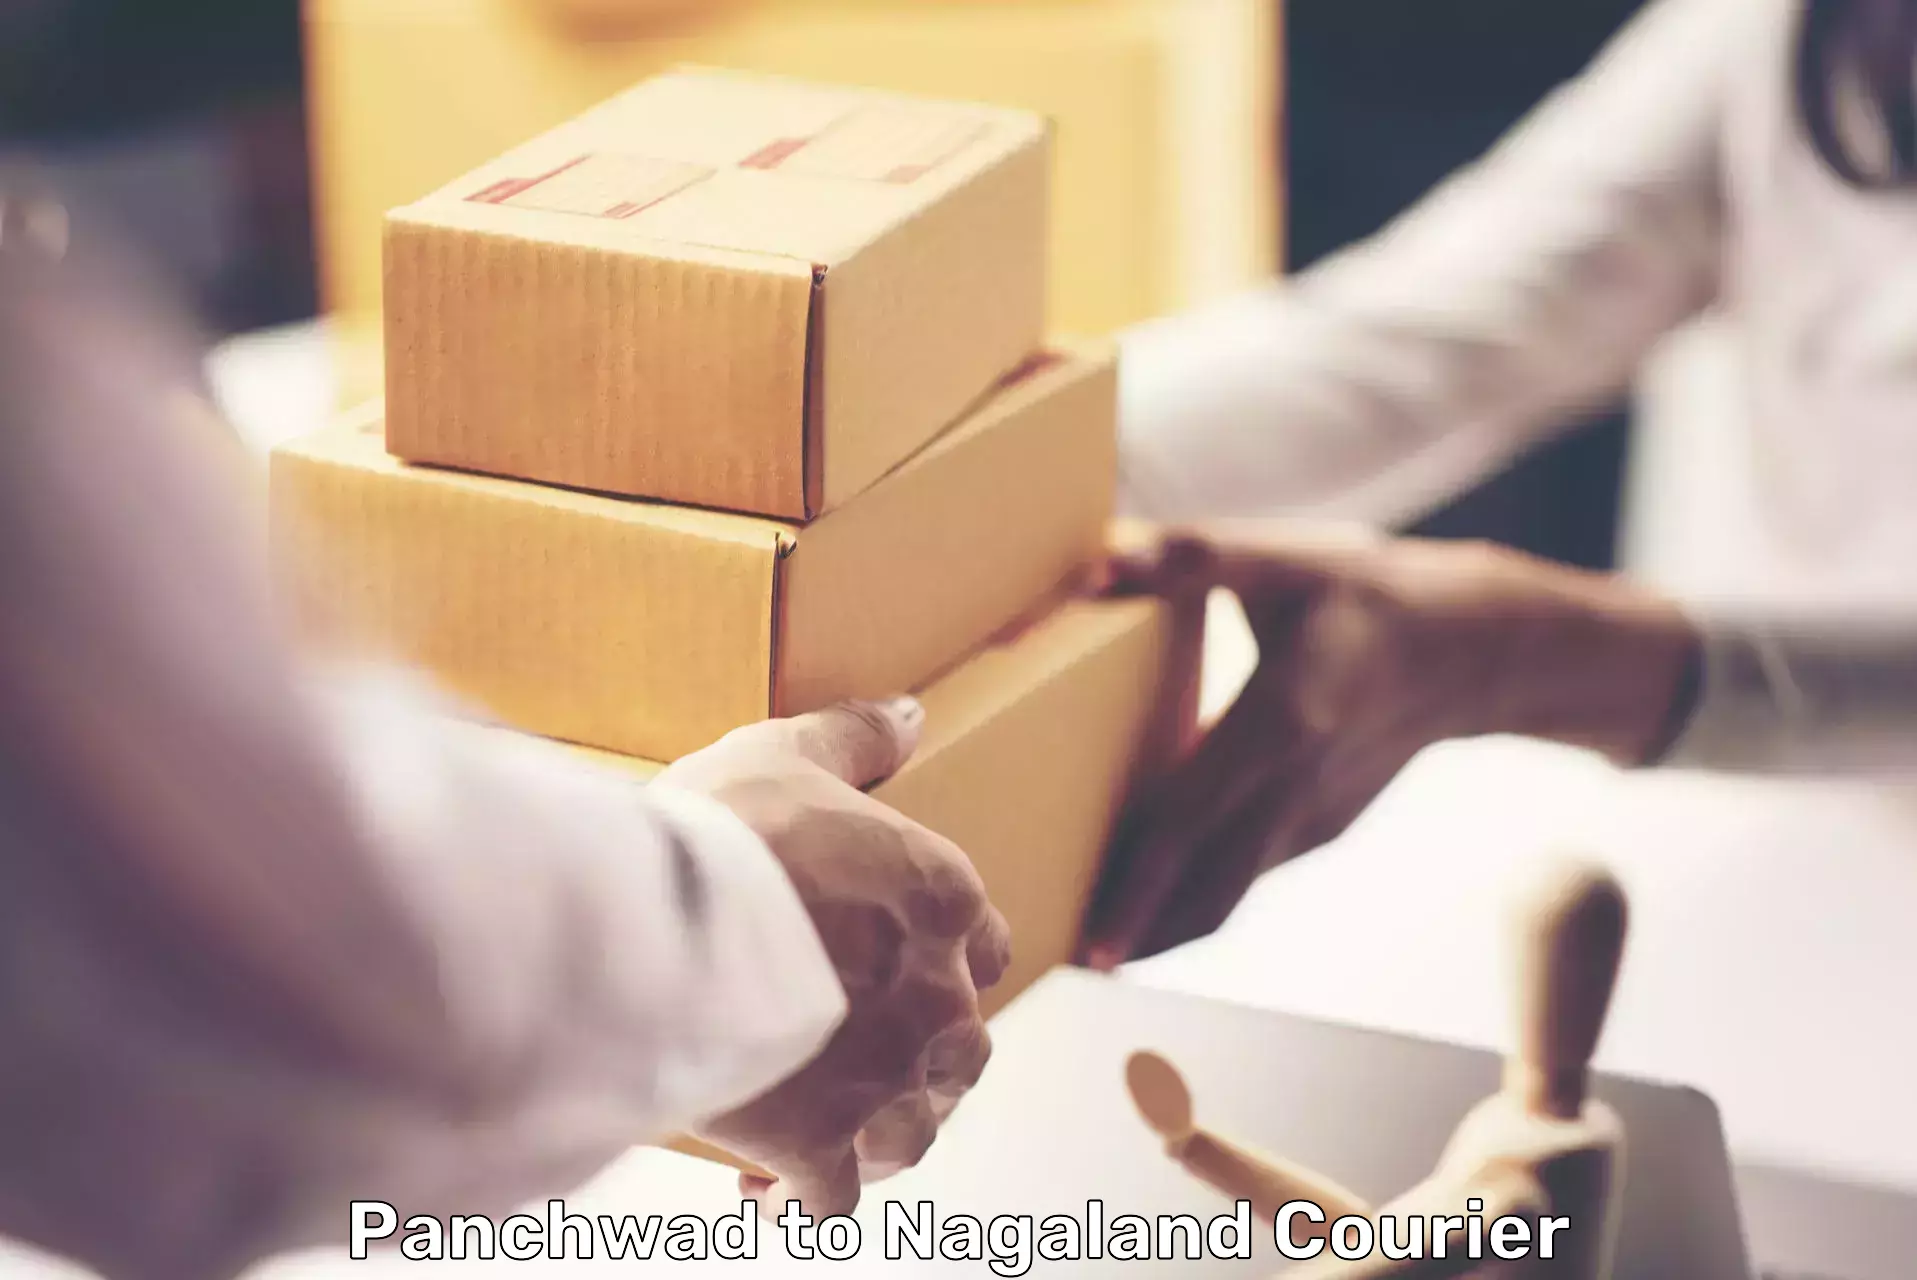 Package delivery network Panchwad to Mon